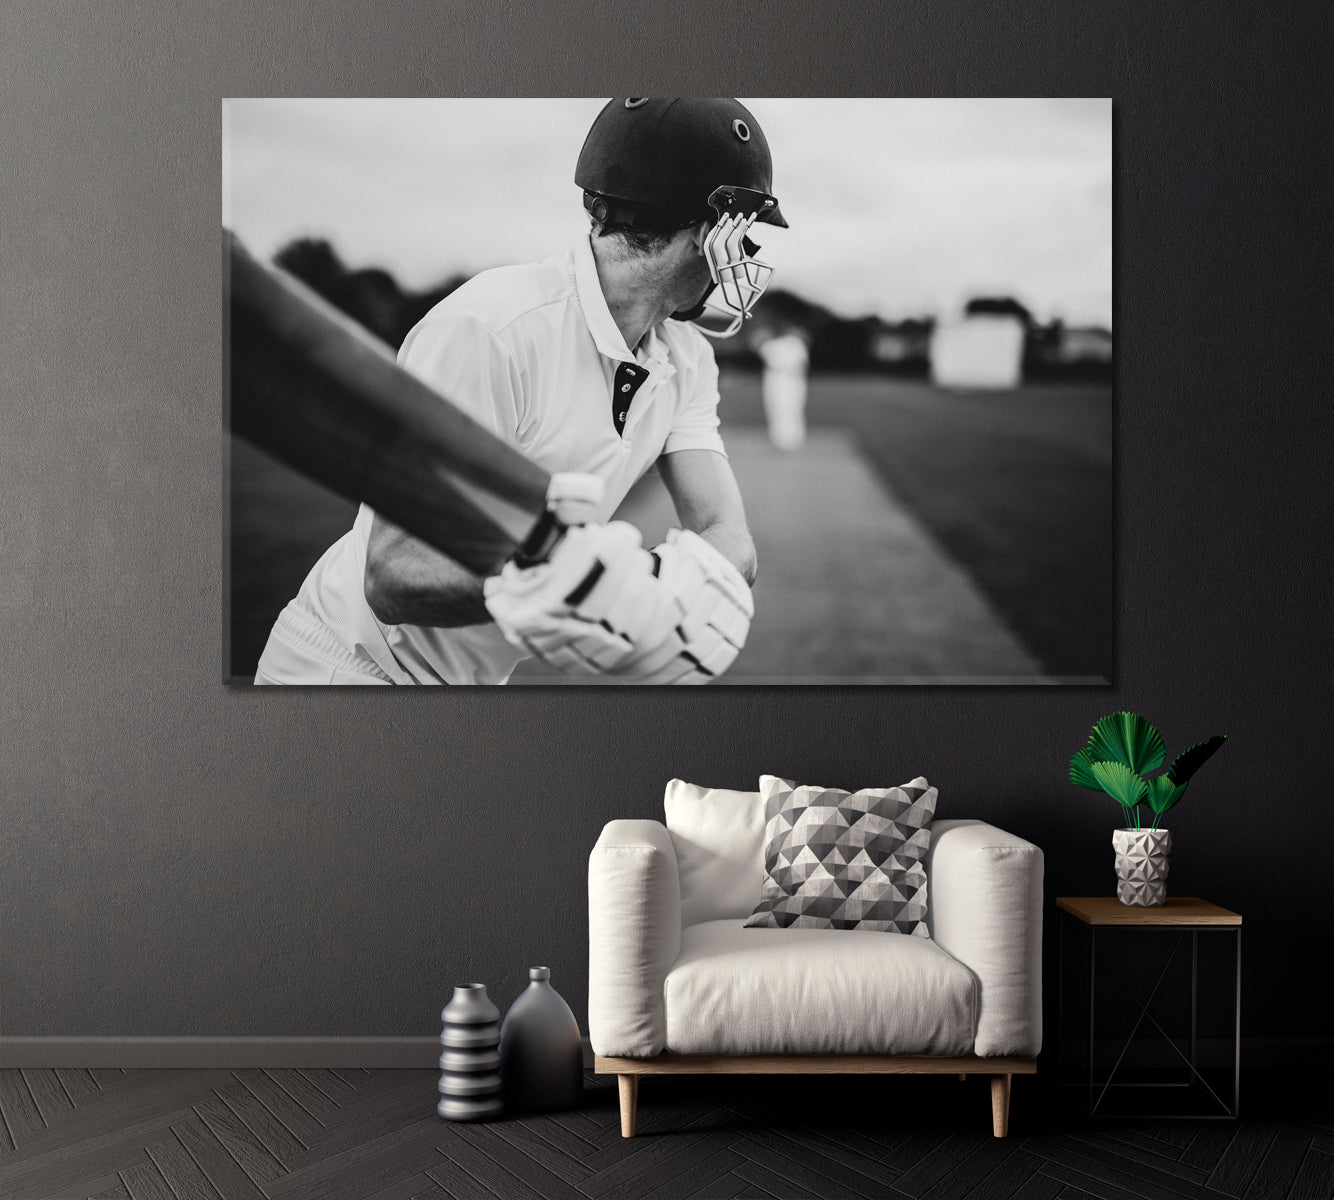 Cricketer in Action Canvas Print ArtLexy 1 Panel 24"x16" inches 